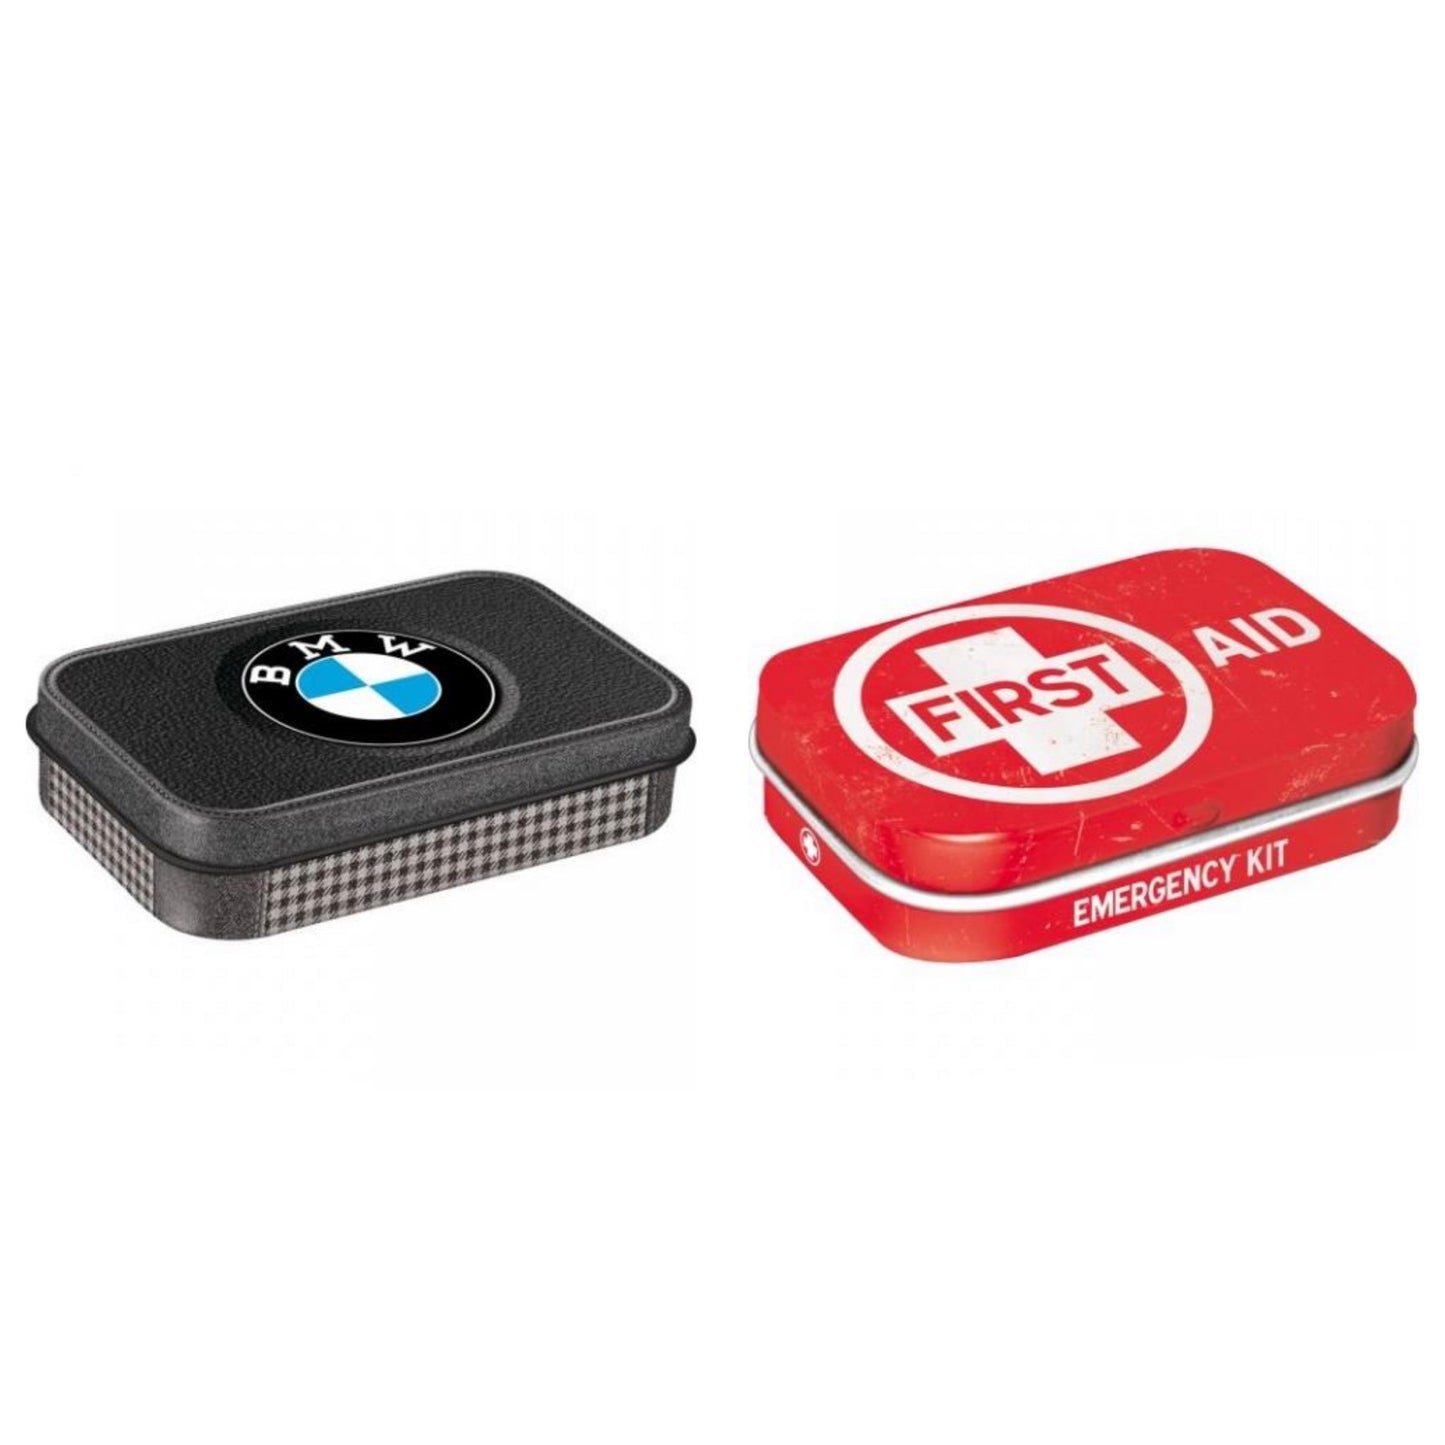 Mints BMW and First Aid Antique Vintage Retro Box - The Renmy Store Homewares & Gifts 